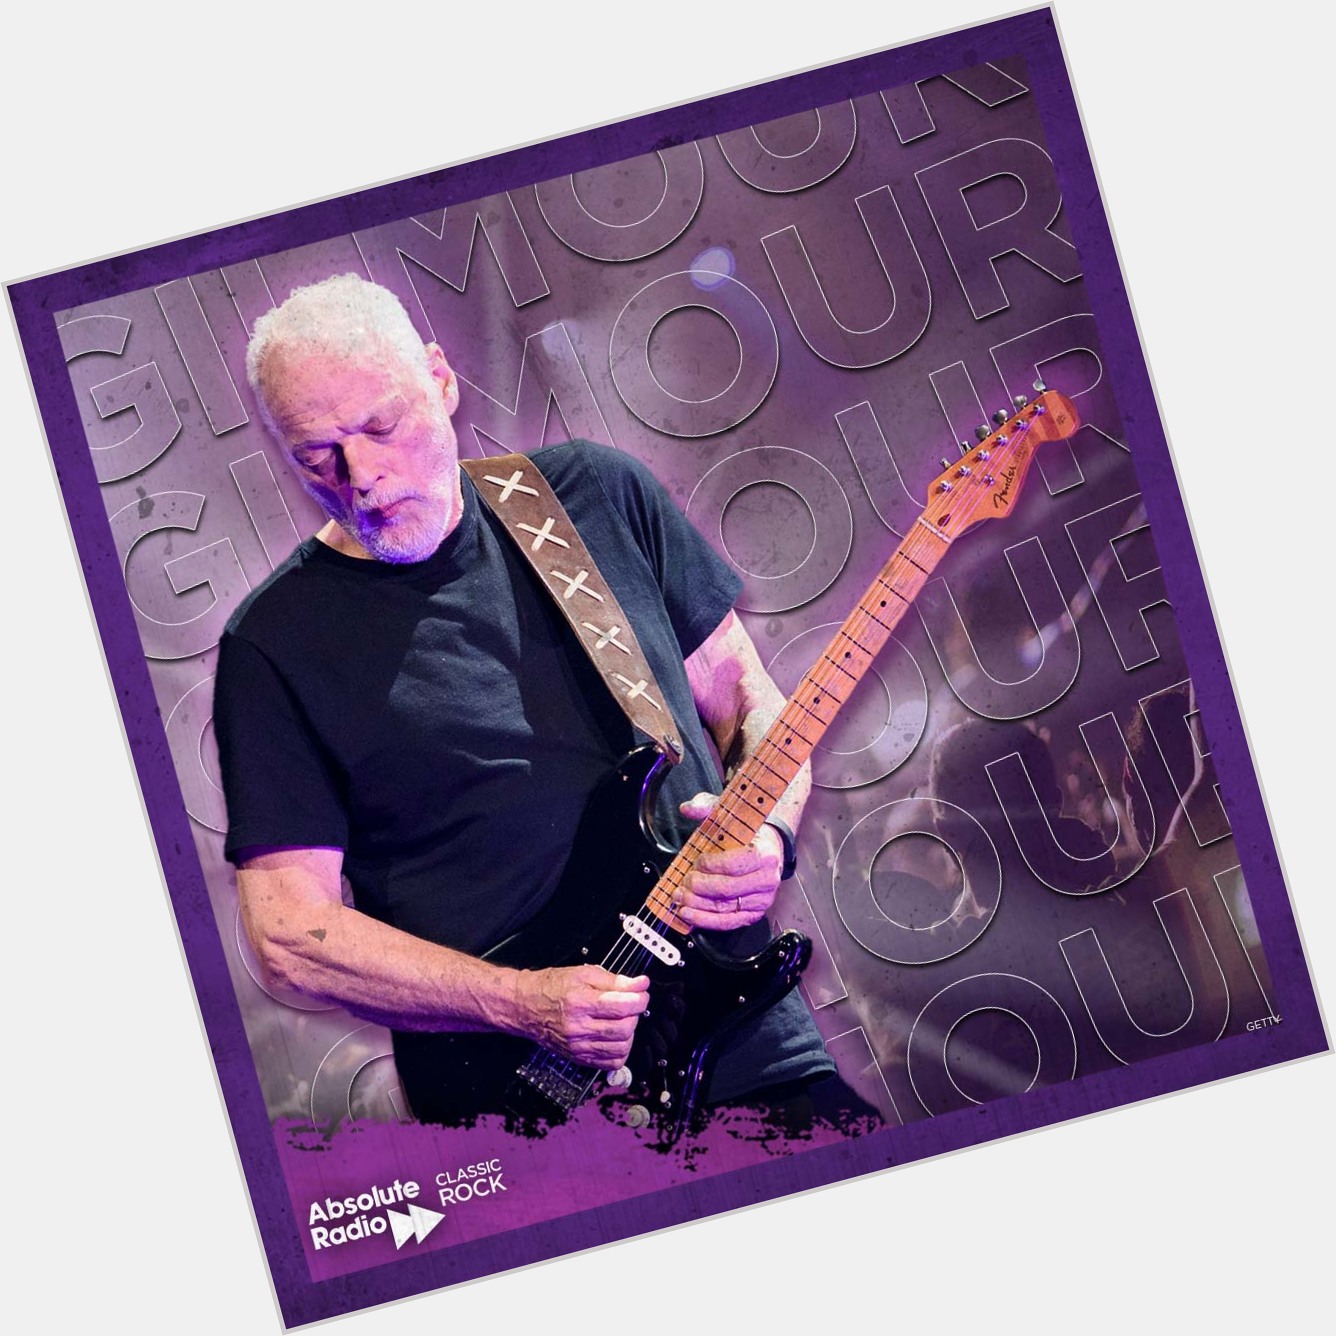 Happy birthday Mr David Gilmour!

The Pink Floyd and guitar legend is 77 today! 